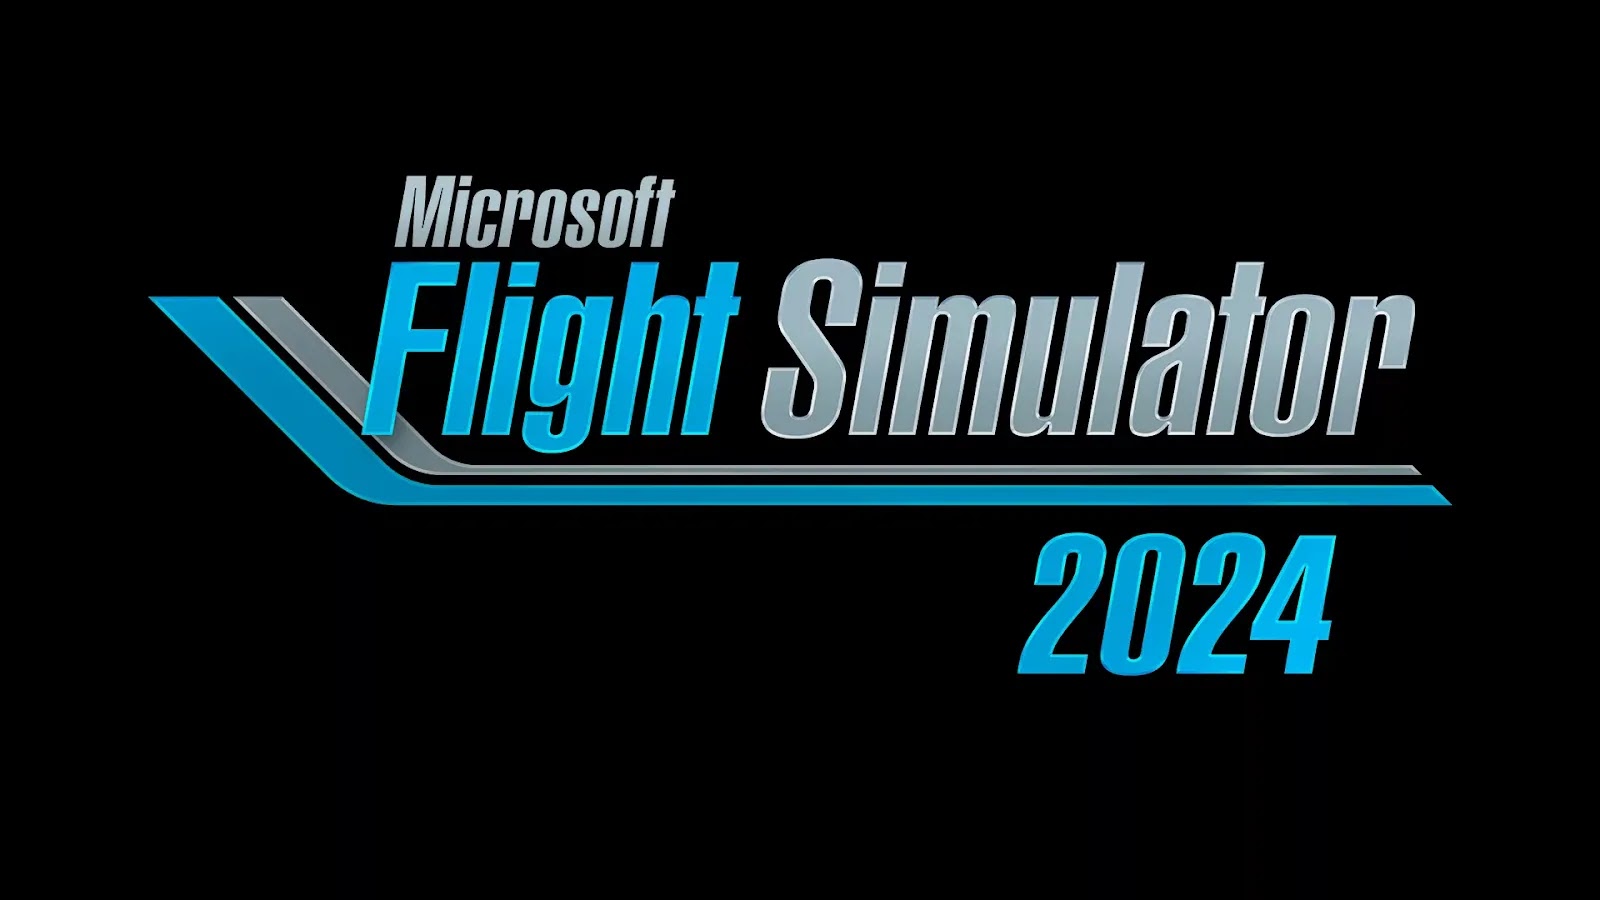 Microsoft Flight Simulator 2024 A Look at Exciting Features and Expansions